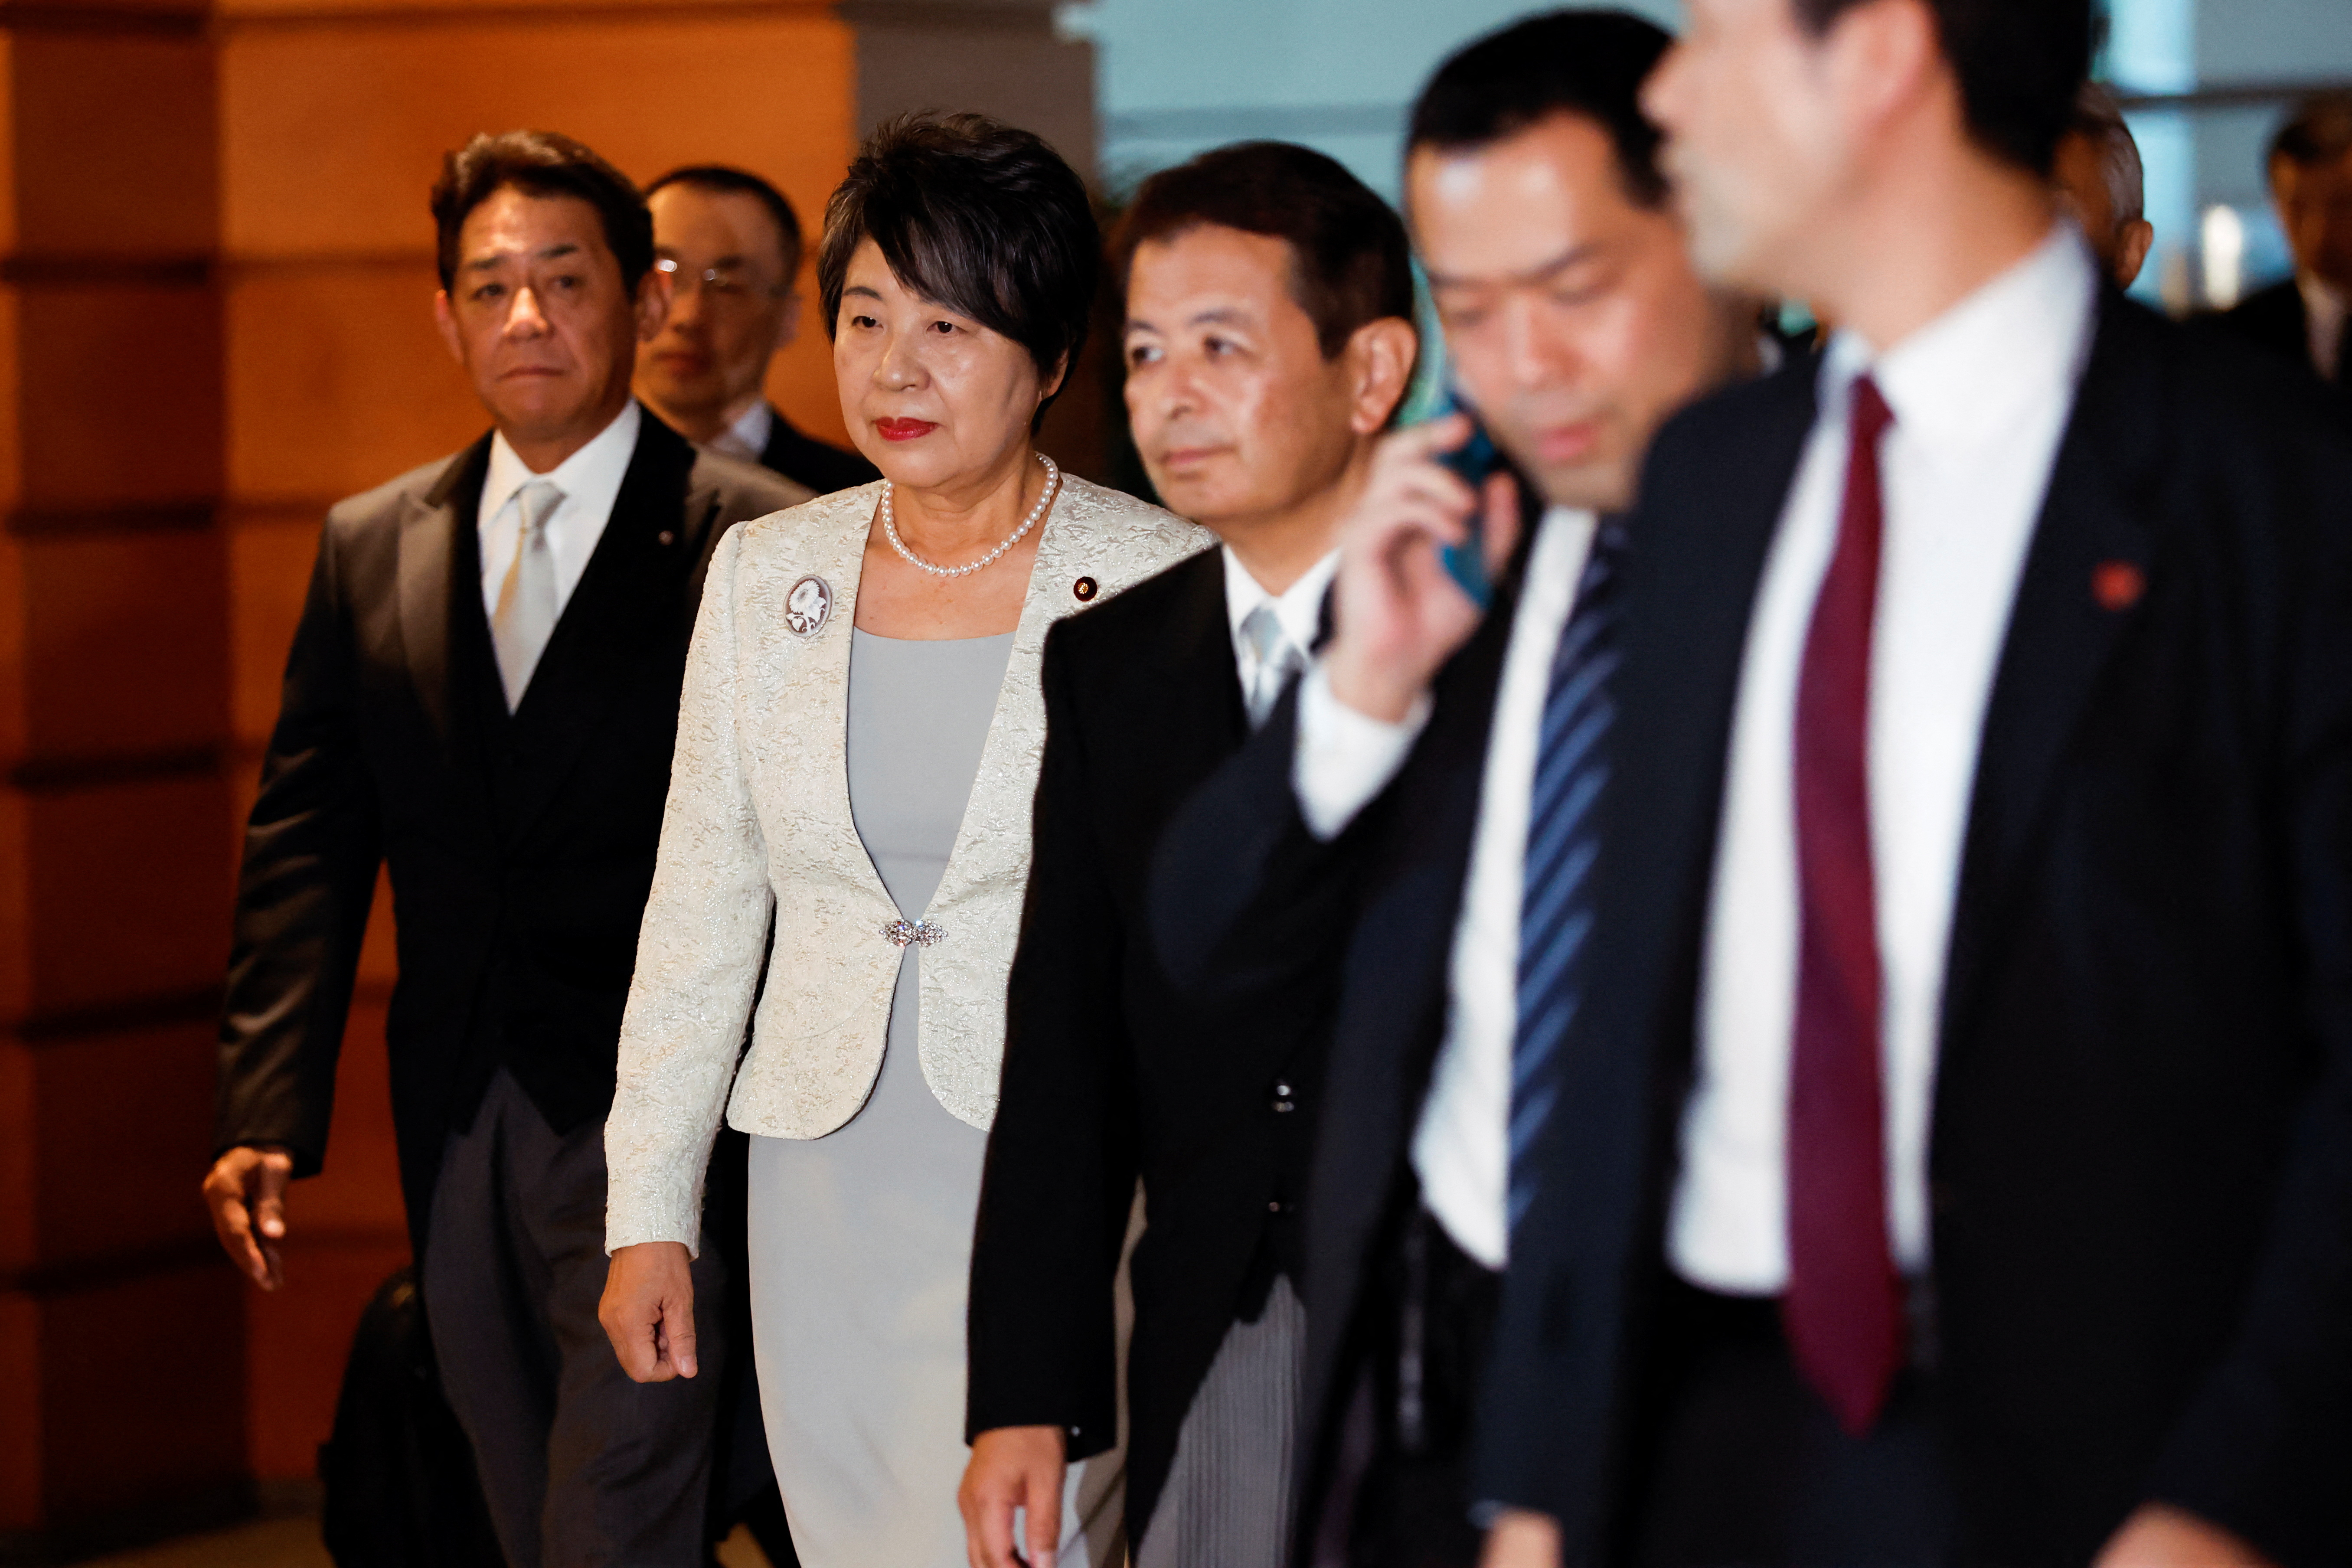 Japan has five women in new government line-up but still misses G7 average Reuters